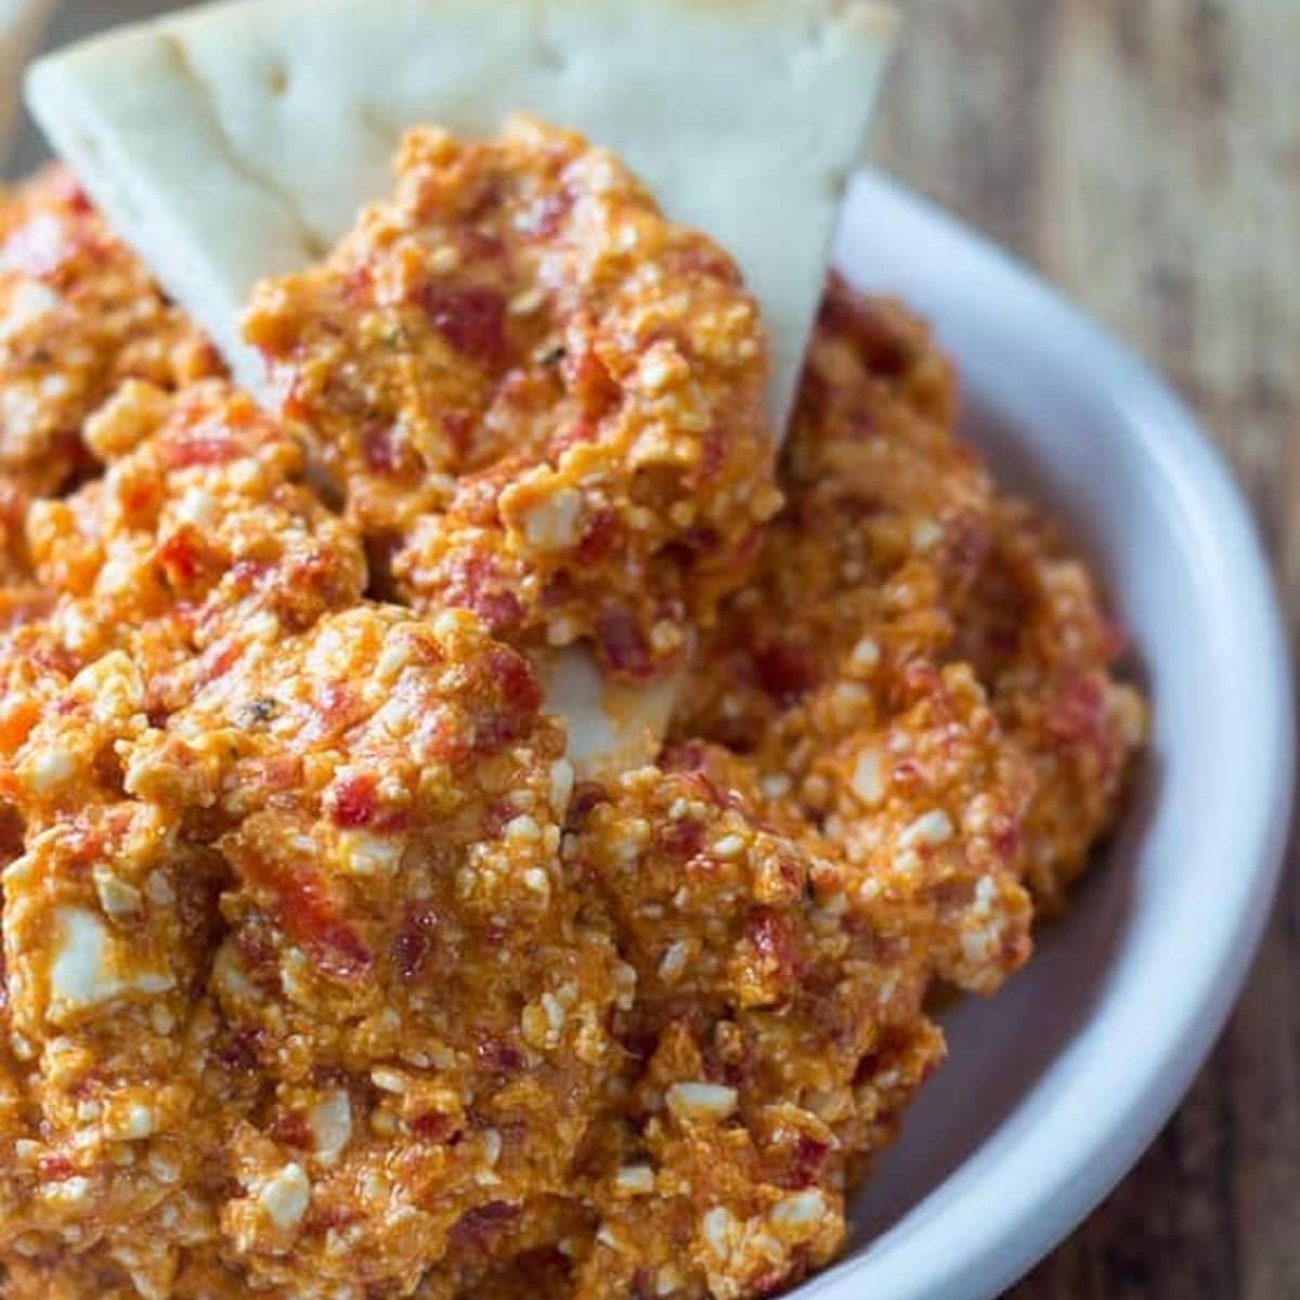 Roasted Red Pepper And Feta Spread